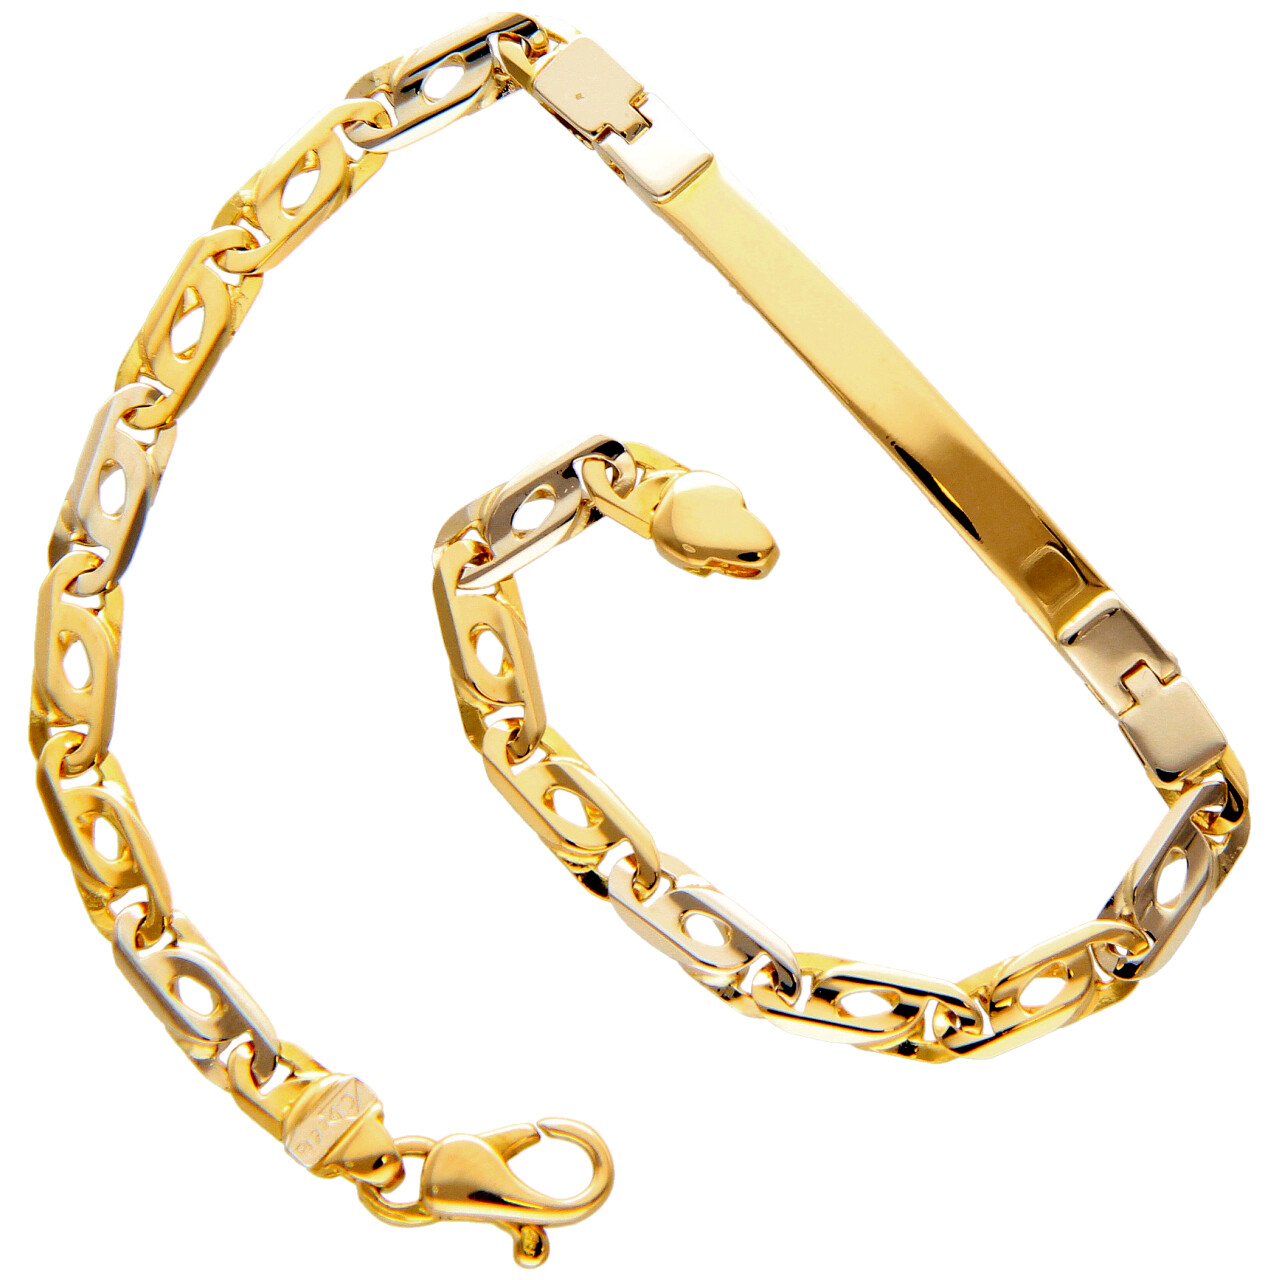 White and yellow gold bracelet